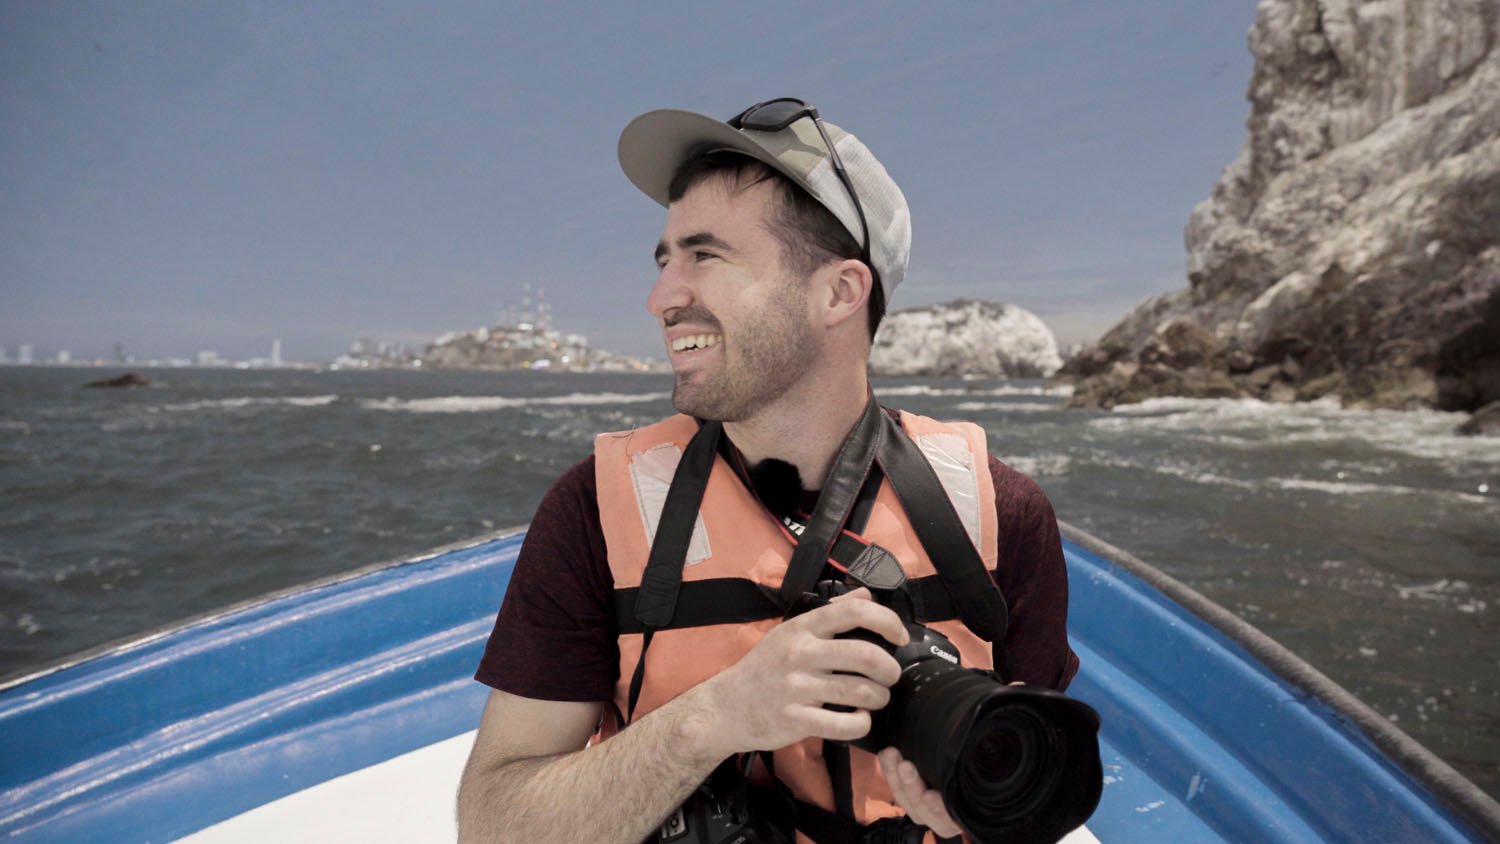 A smiling man wearing a life vest and a cap holds a camera while sitting in a boat, with a rocky shoreline and water in the background.